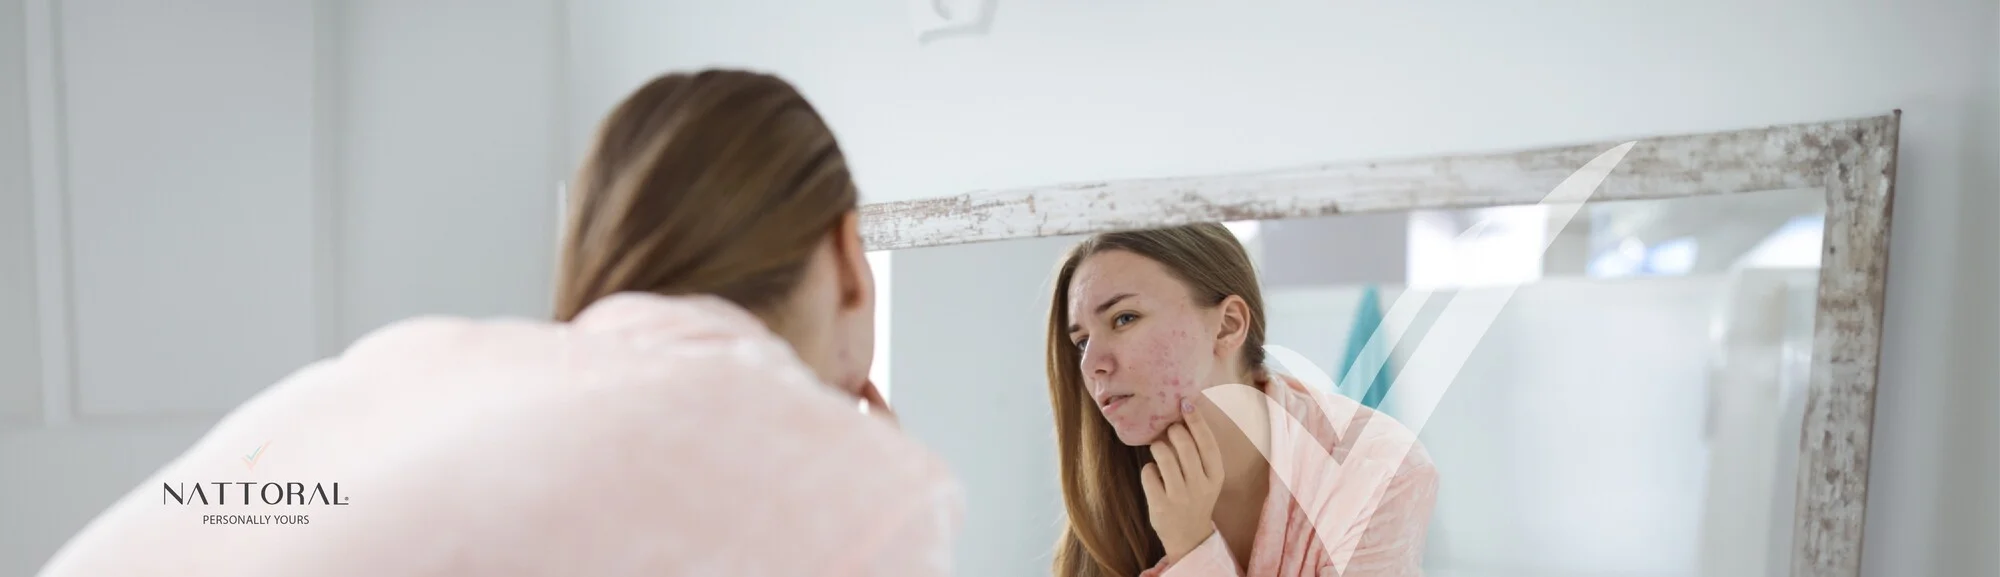 The Beginner’s Guide To Using Roaccutane/Isotretinoin